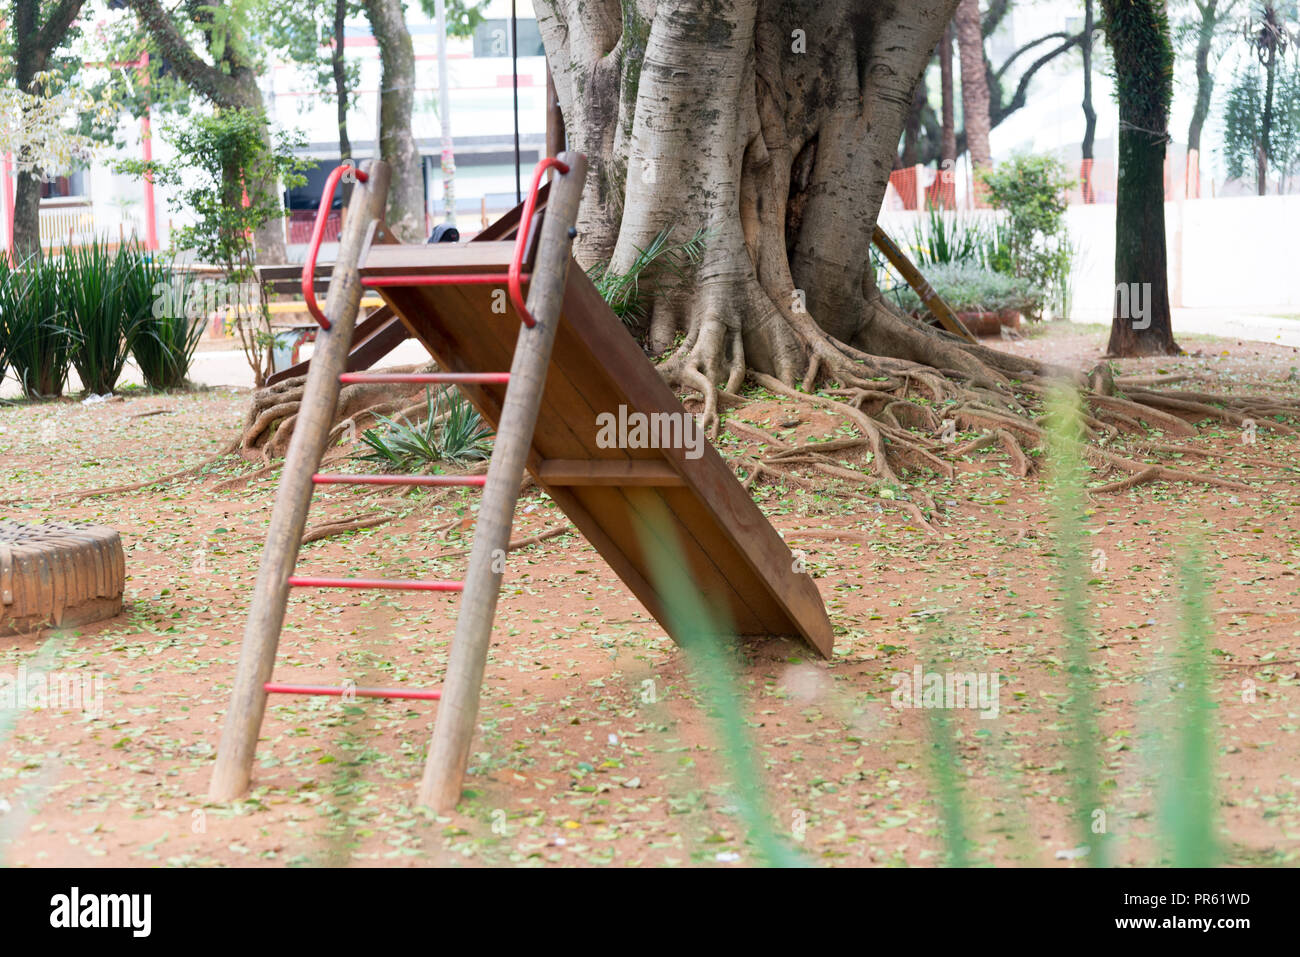 Public toys and exercise equipments at the park on sunny day Stock Photo